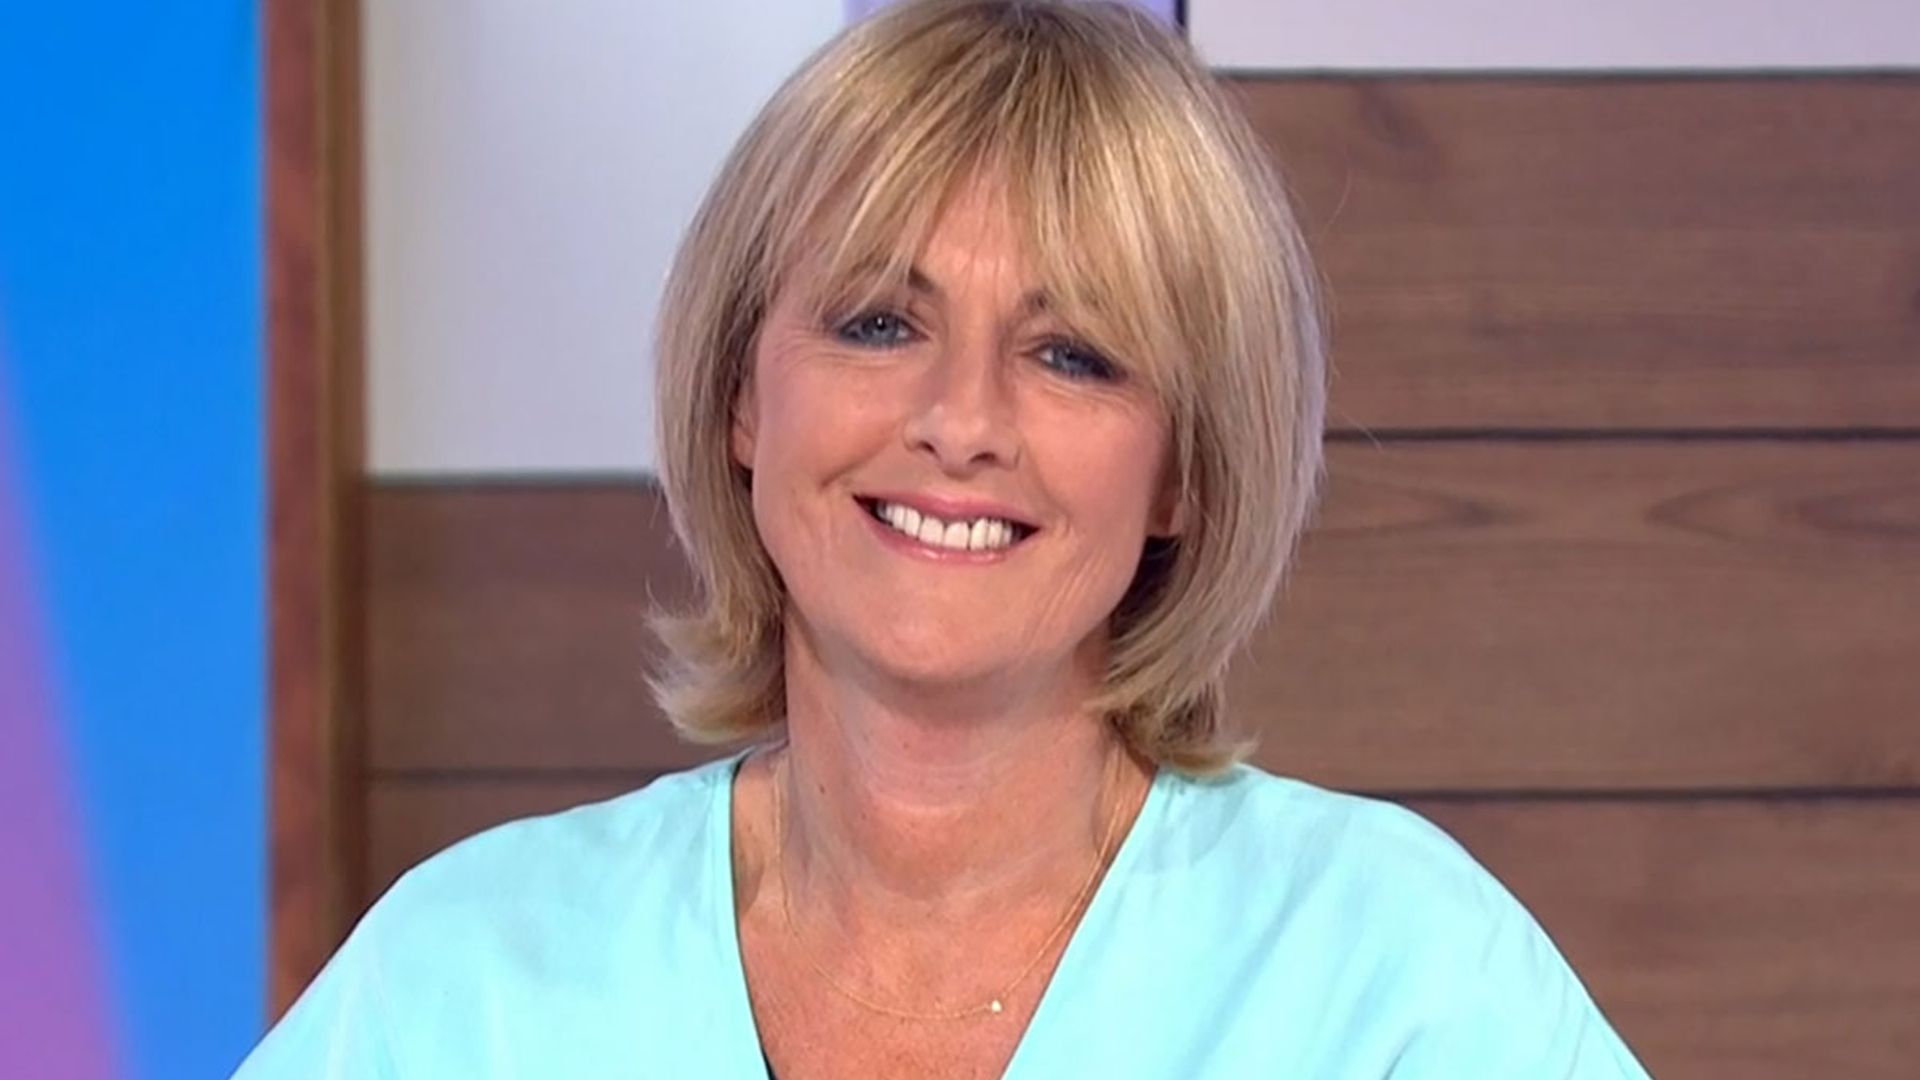 Jane Moore's fitted Zara dress wows Loose Women viewers